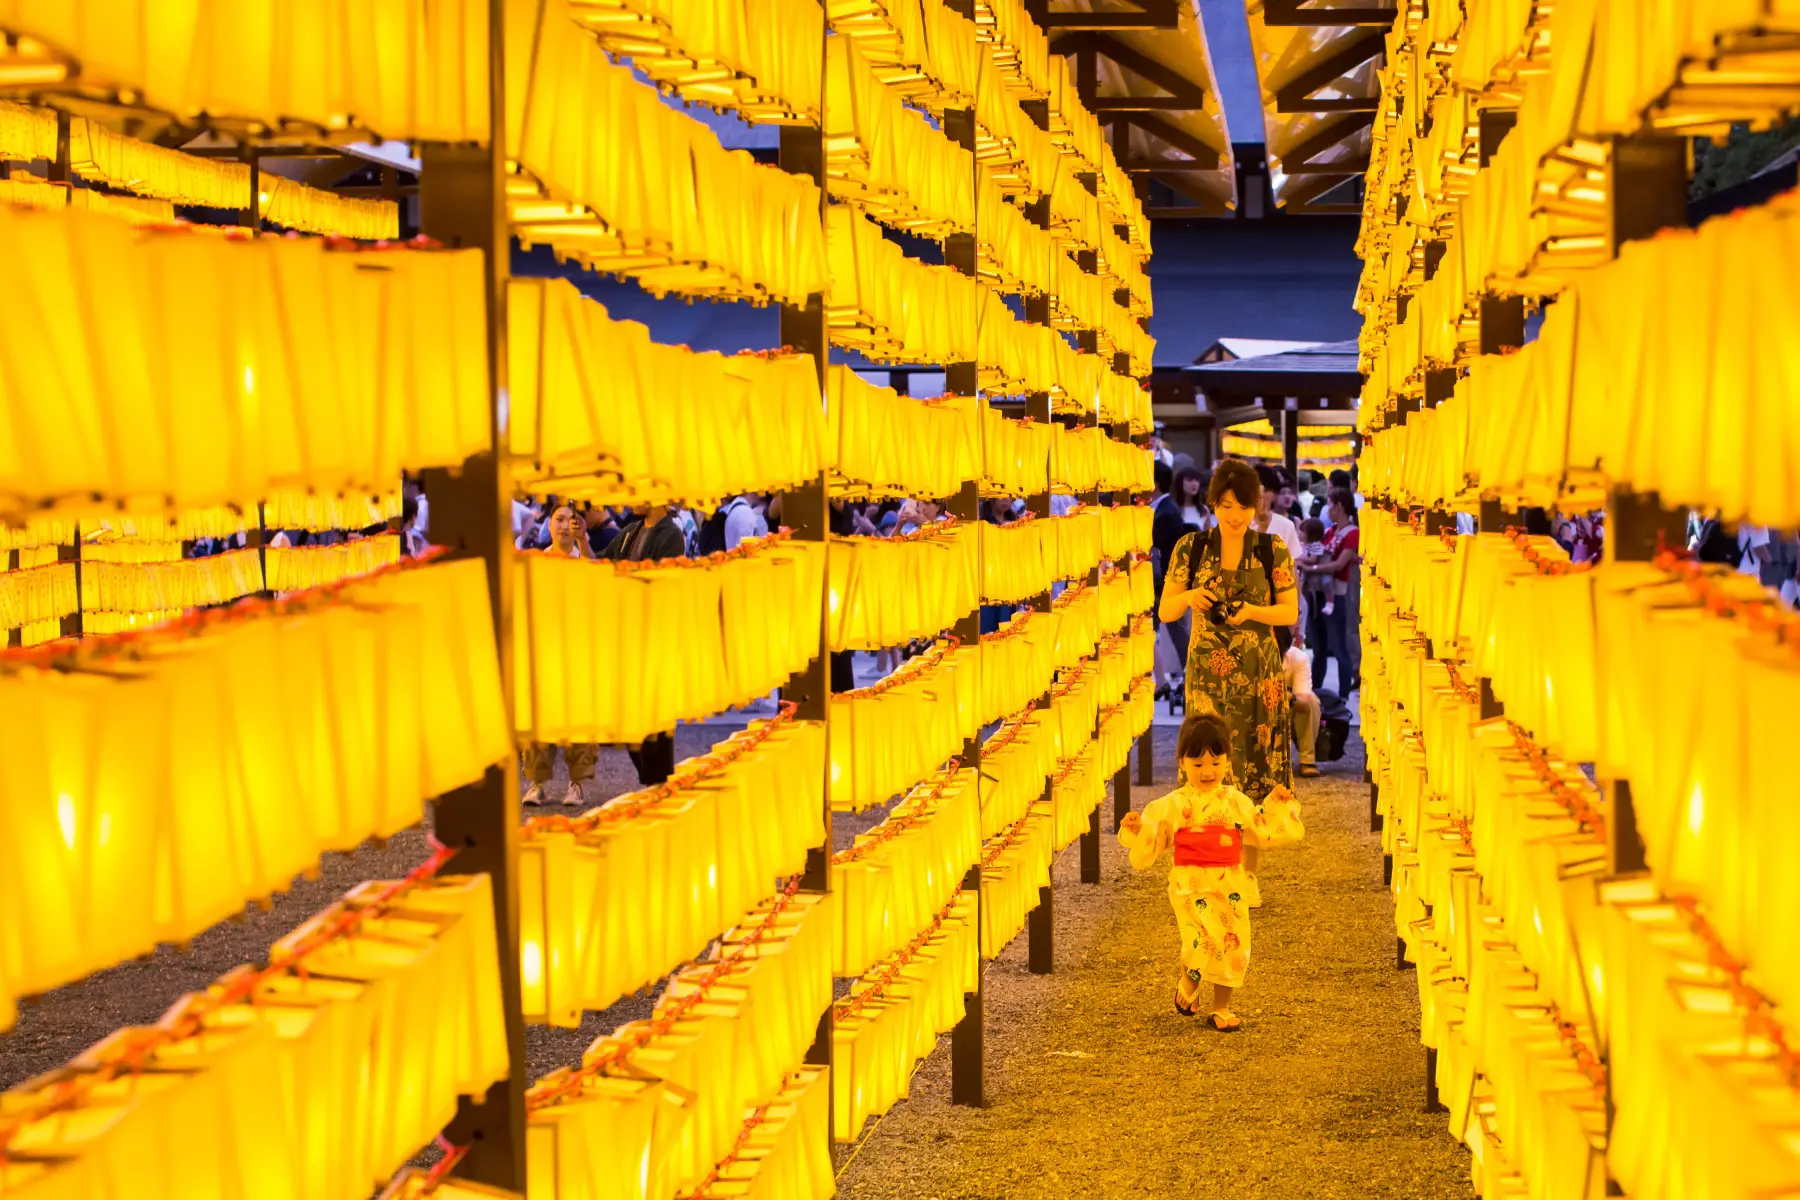 Mother takes photo of her daughter in the Yasukuni Shrine at the Mitama Festival. Everything is yellow.